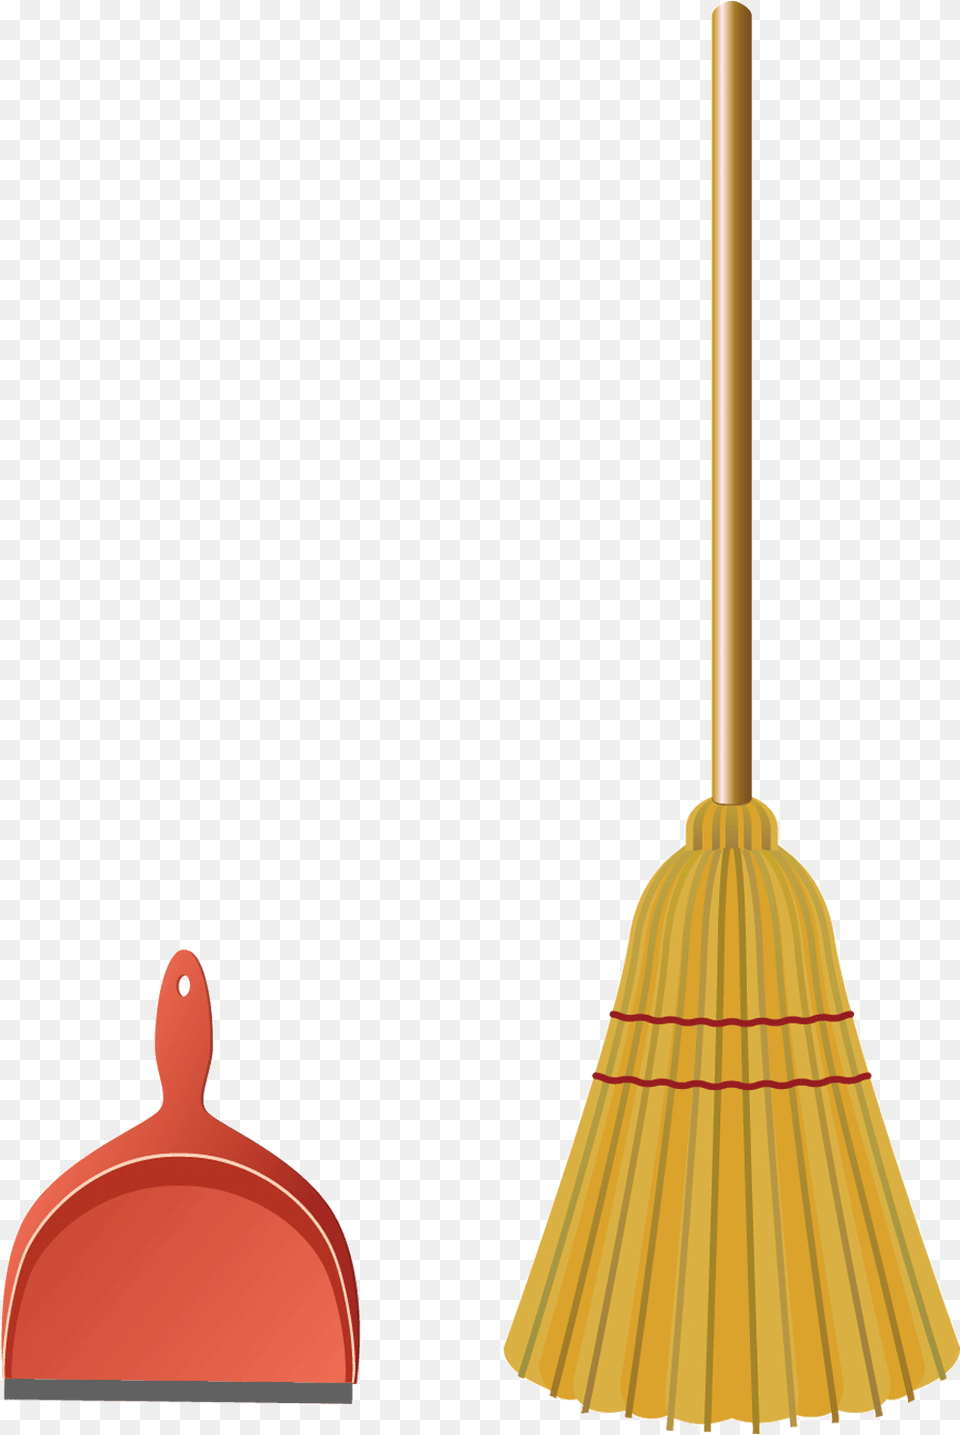 Broom Cleaning Illustration Cartoon Image Broom And Dustpan Cartoon Free Png Download